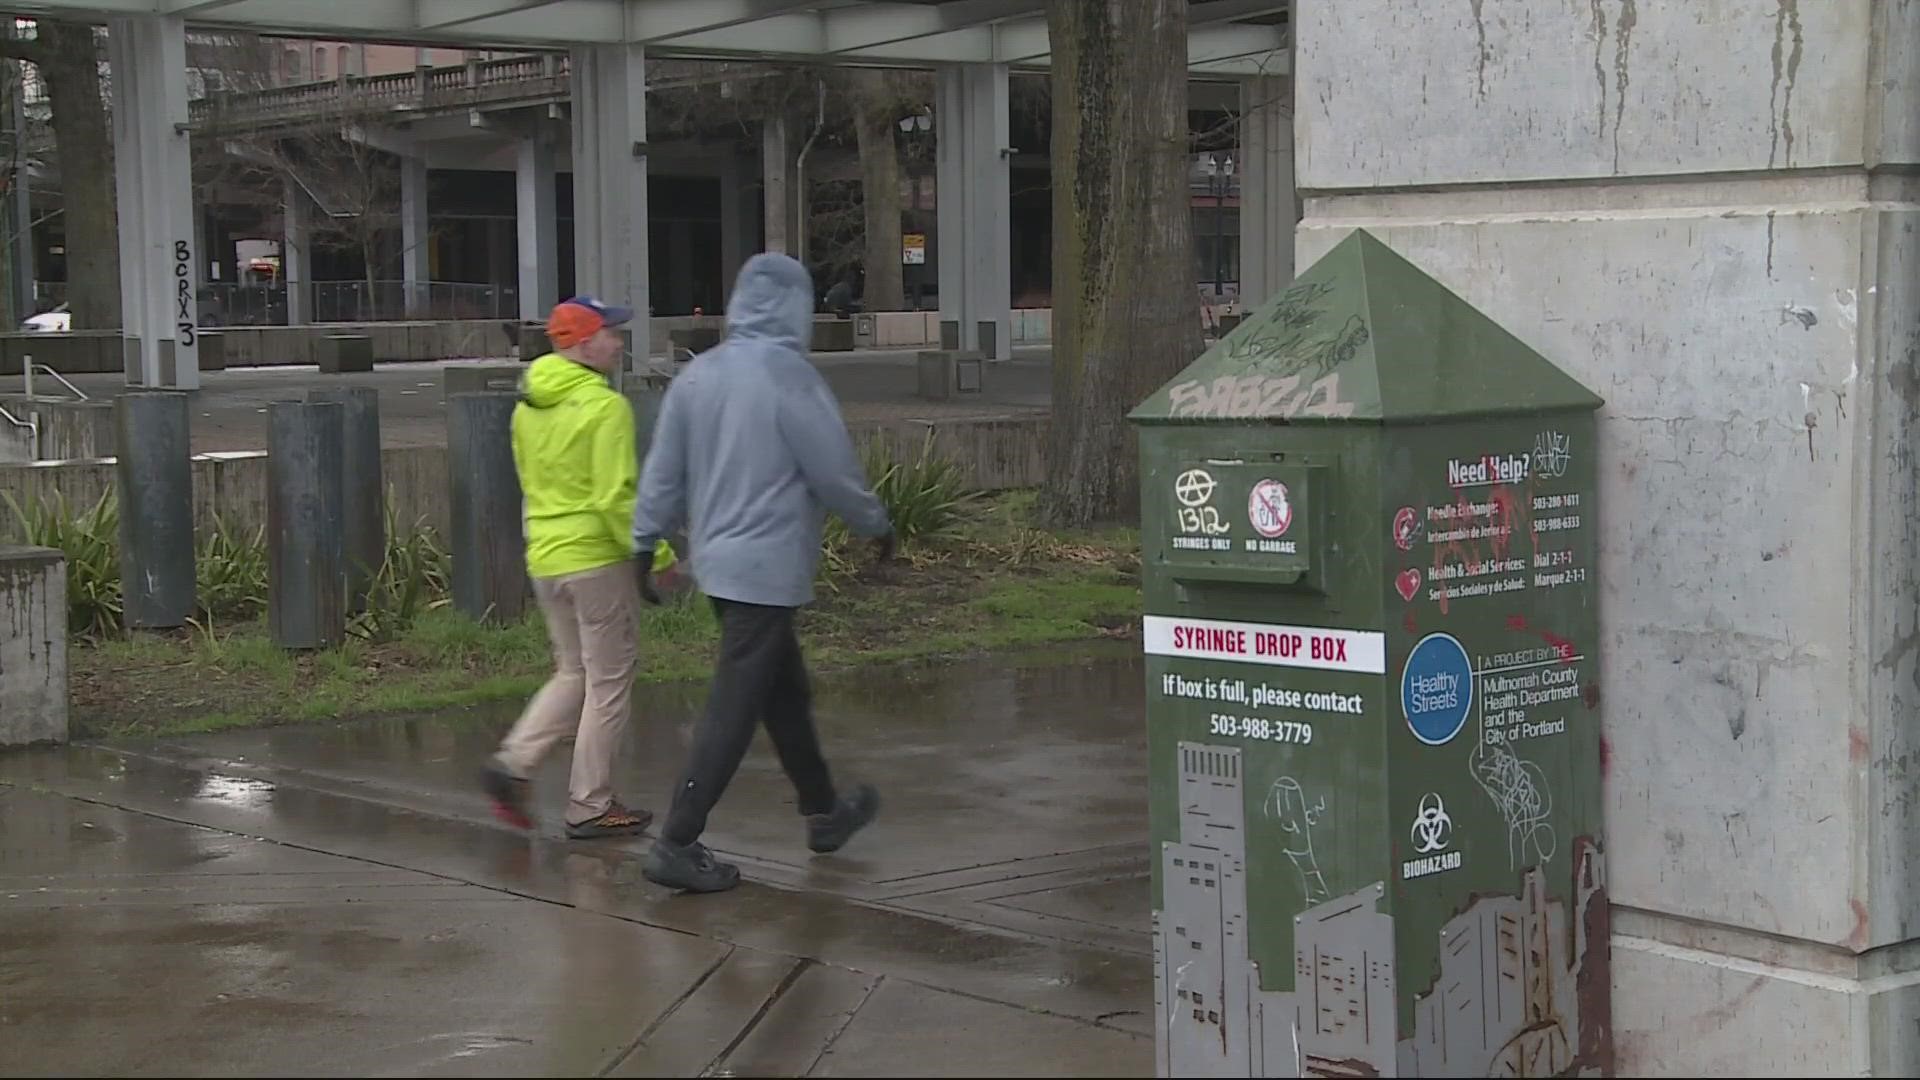 The problem of used hypodermic needles littering Portland streets continues to grow, according to the latest numbers from Downtown Portland Clean and Safe.